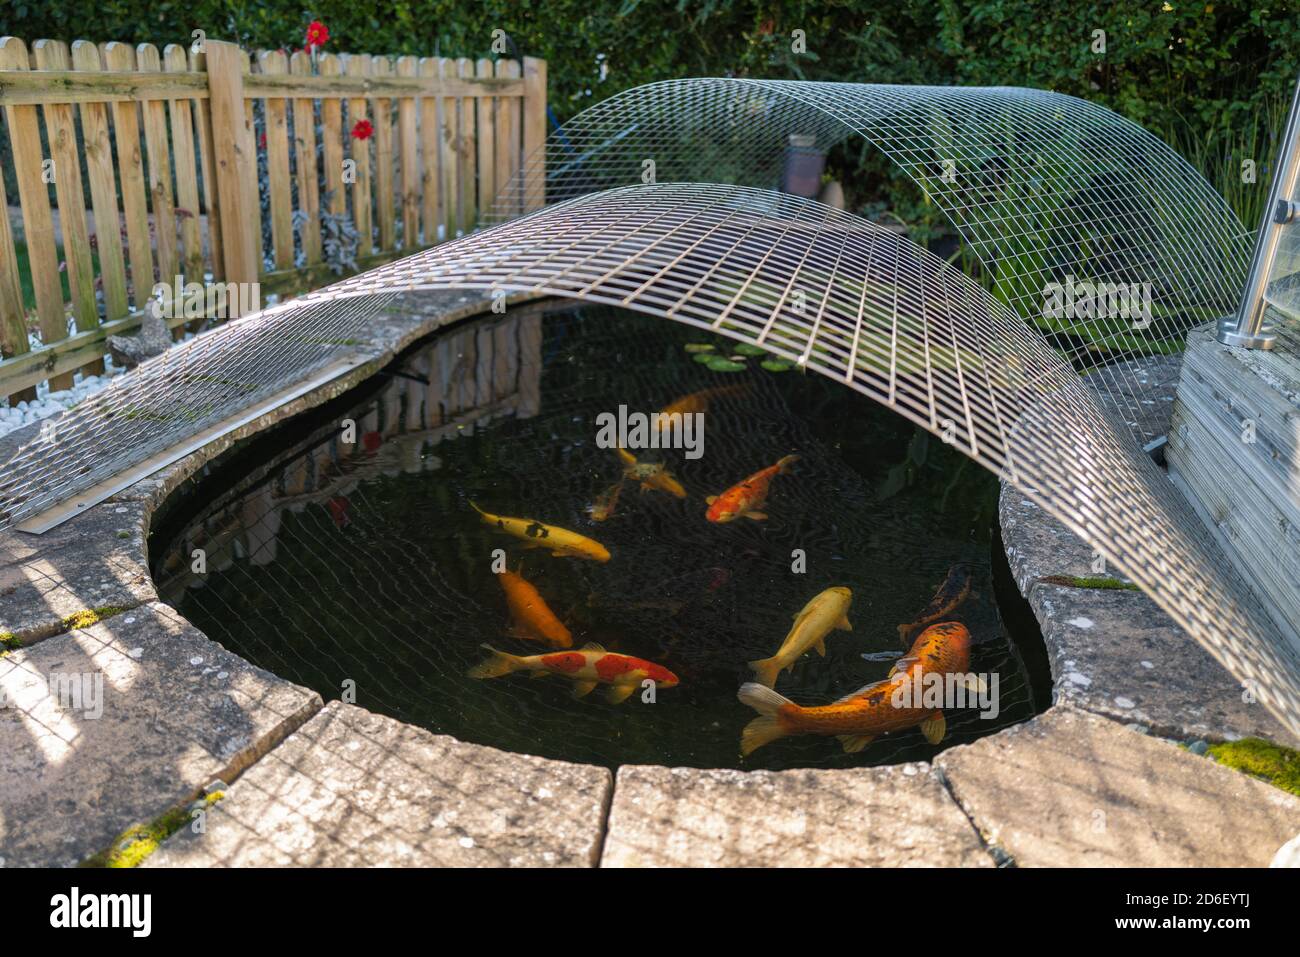 Koi carp fish in a pond with a mesh cover heron protector and picket fence  surround Stock Photo - Alamy